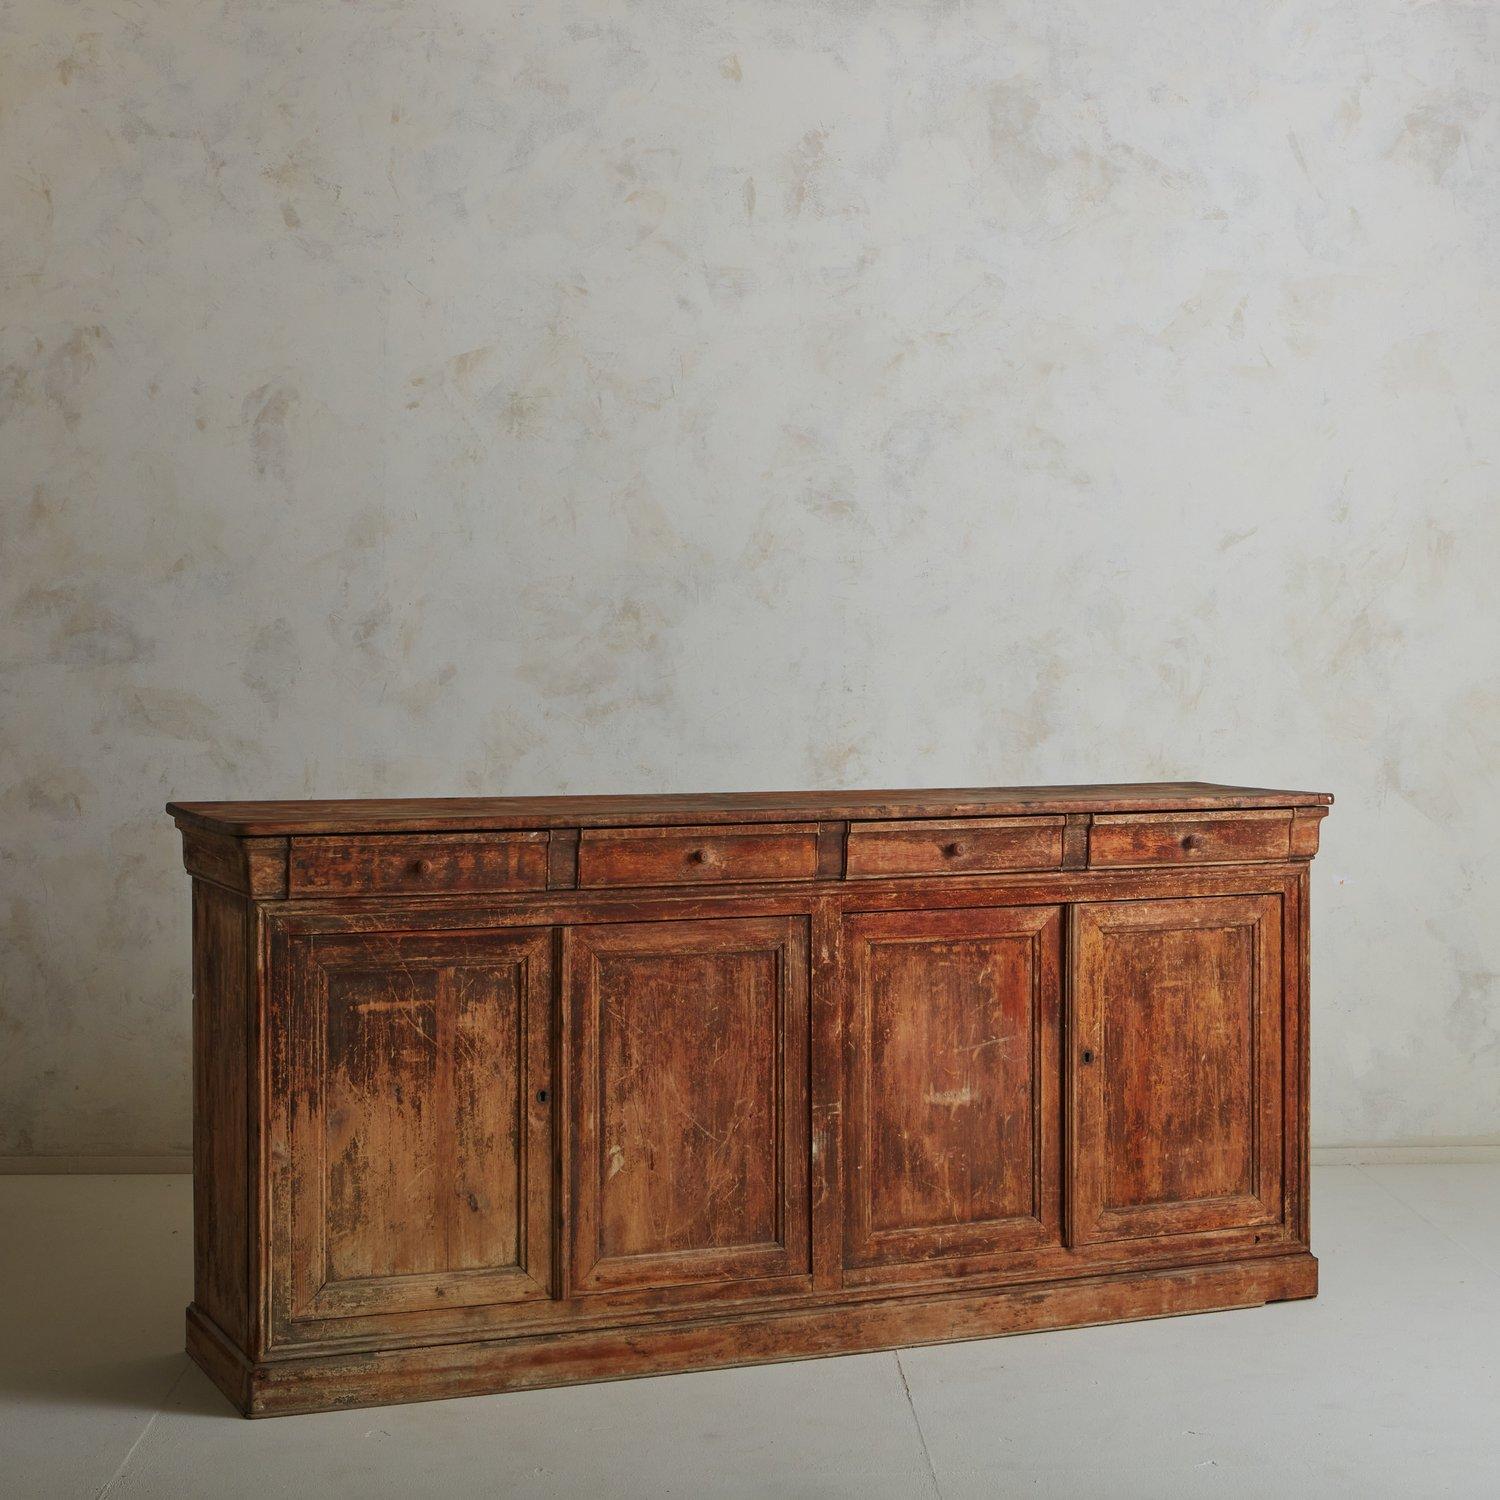 A large scale antique wooden cabinet or counter sourced in France. This piece was constructed with wood and features a stunning patina, rich with history and indications of use. It offers significant storage space, with four front doors which open